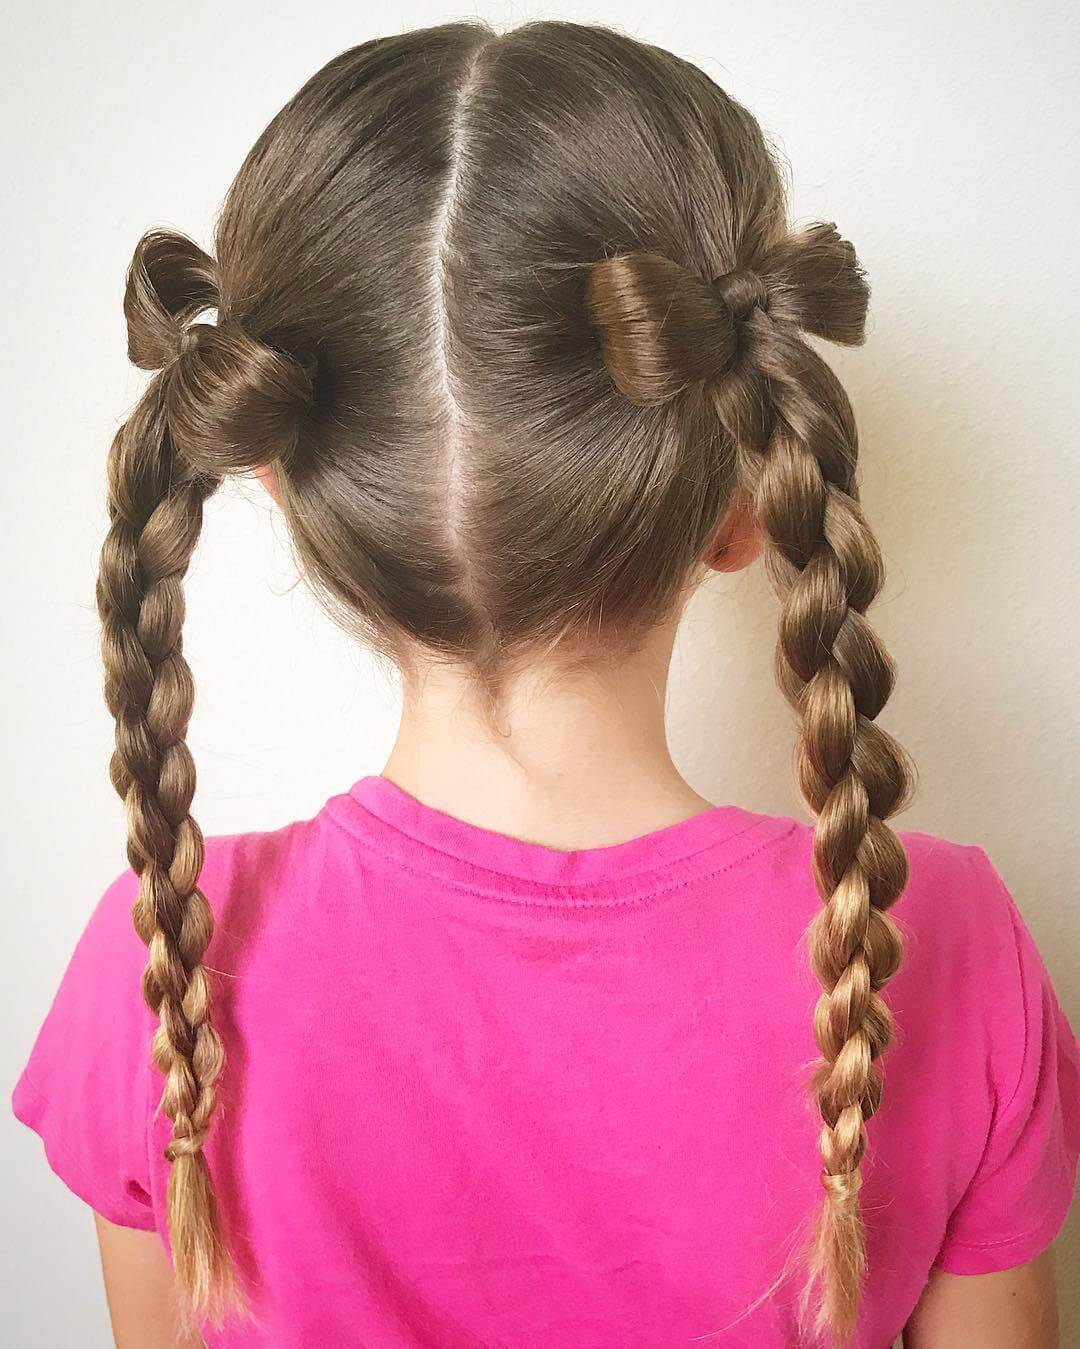 Pigtail Braids With Bow Tie Hairstyle